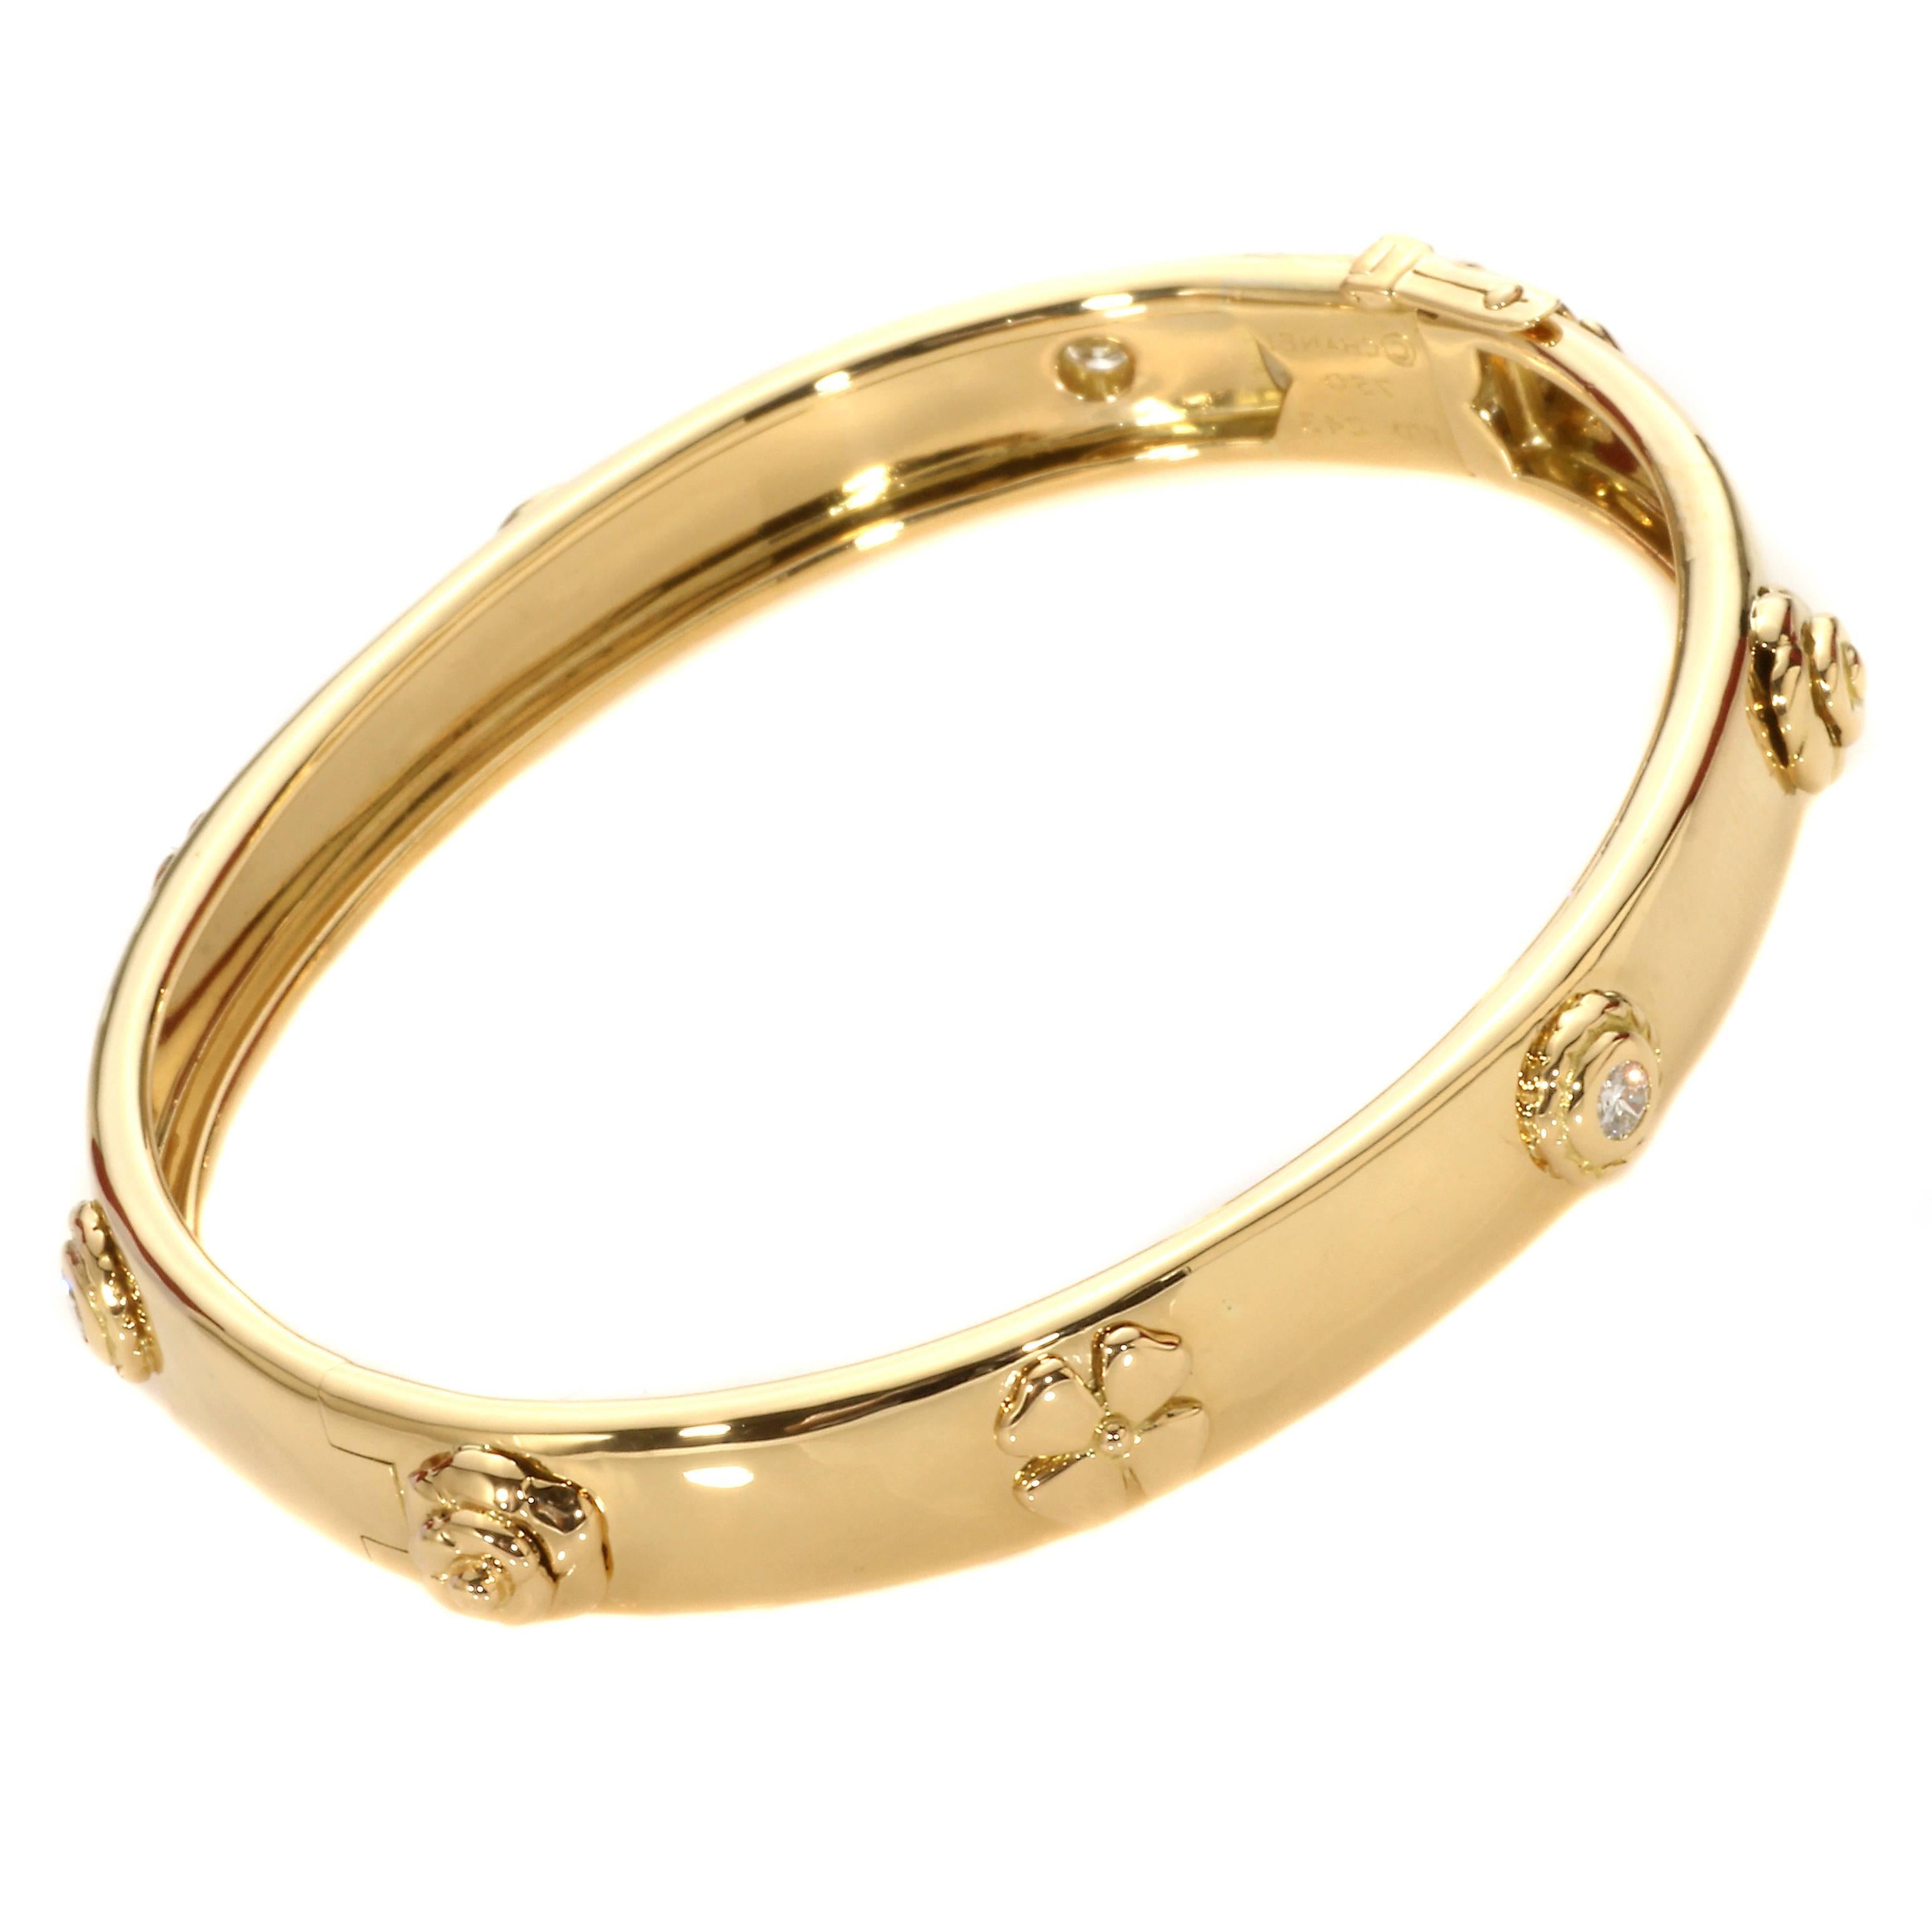 An exceptional Chanel 18k yellow gold diamond bangle part of the posh Caméllia collection, this bangle also features several of Chanel’s iconic Camellia flower icons.

Inventory ID: 0000035